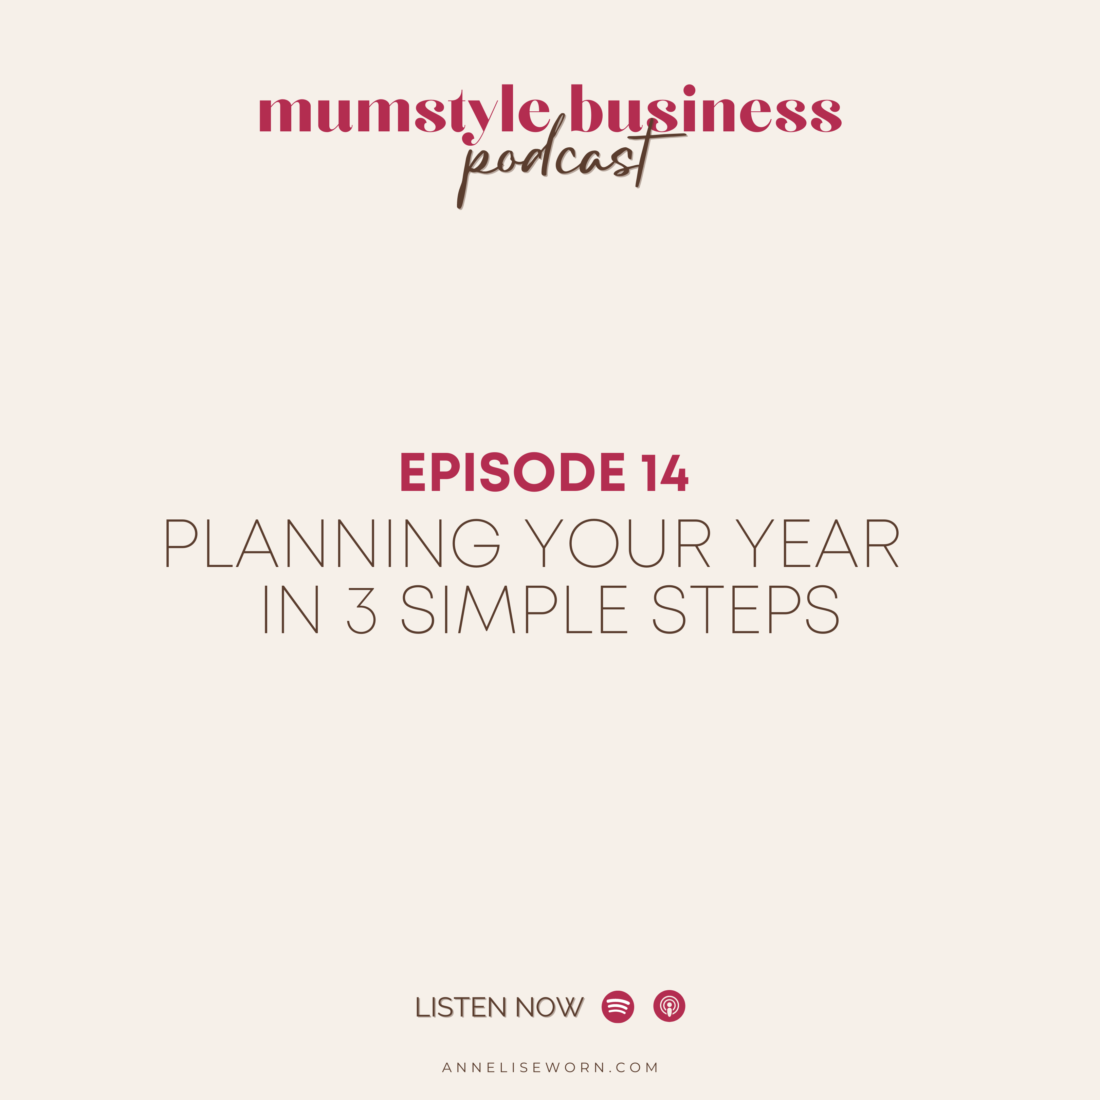 Impact Business Show Episode 29 Planning Your Year - In 3 Simple Steps